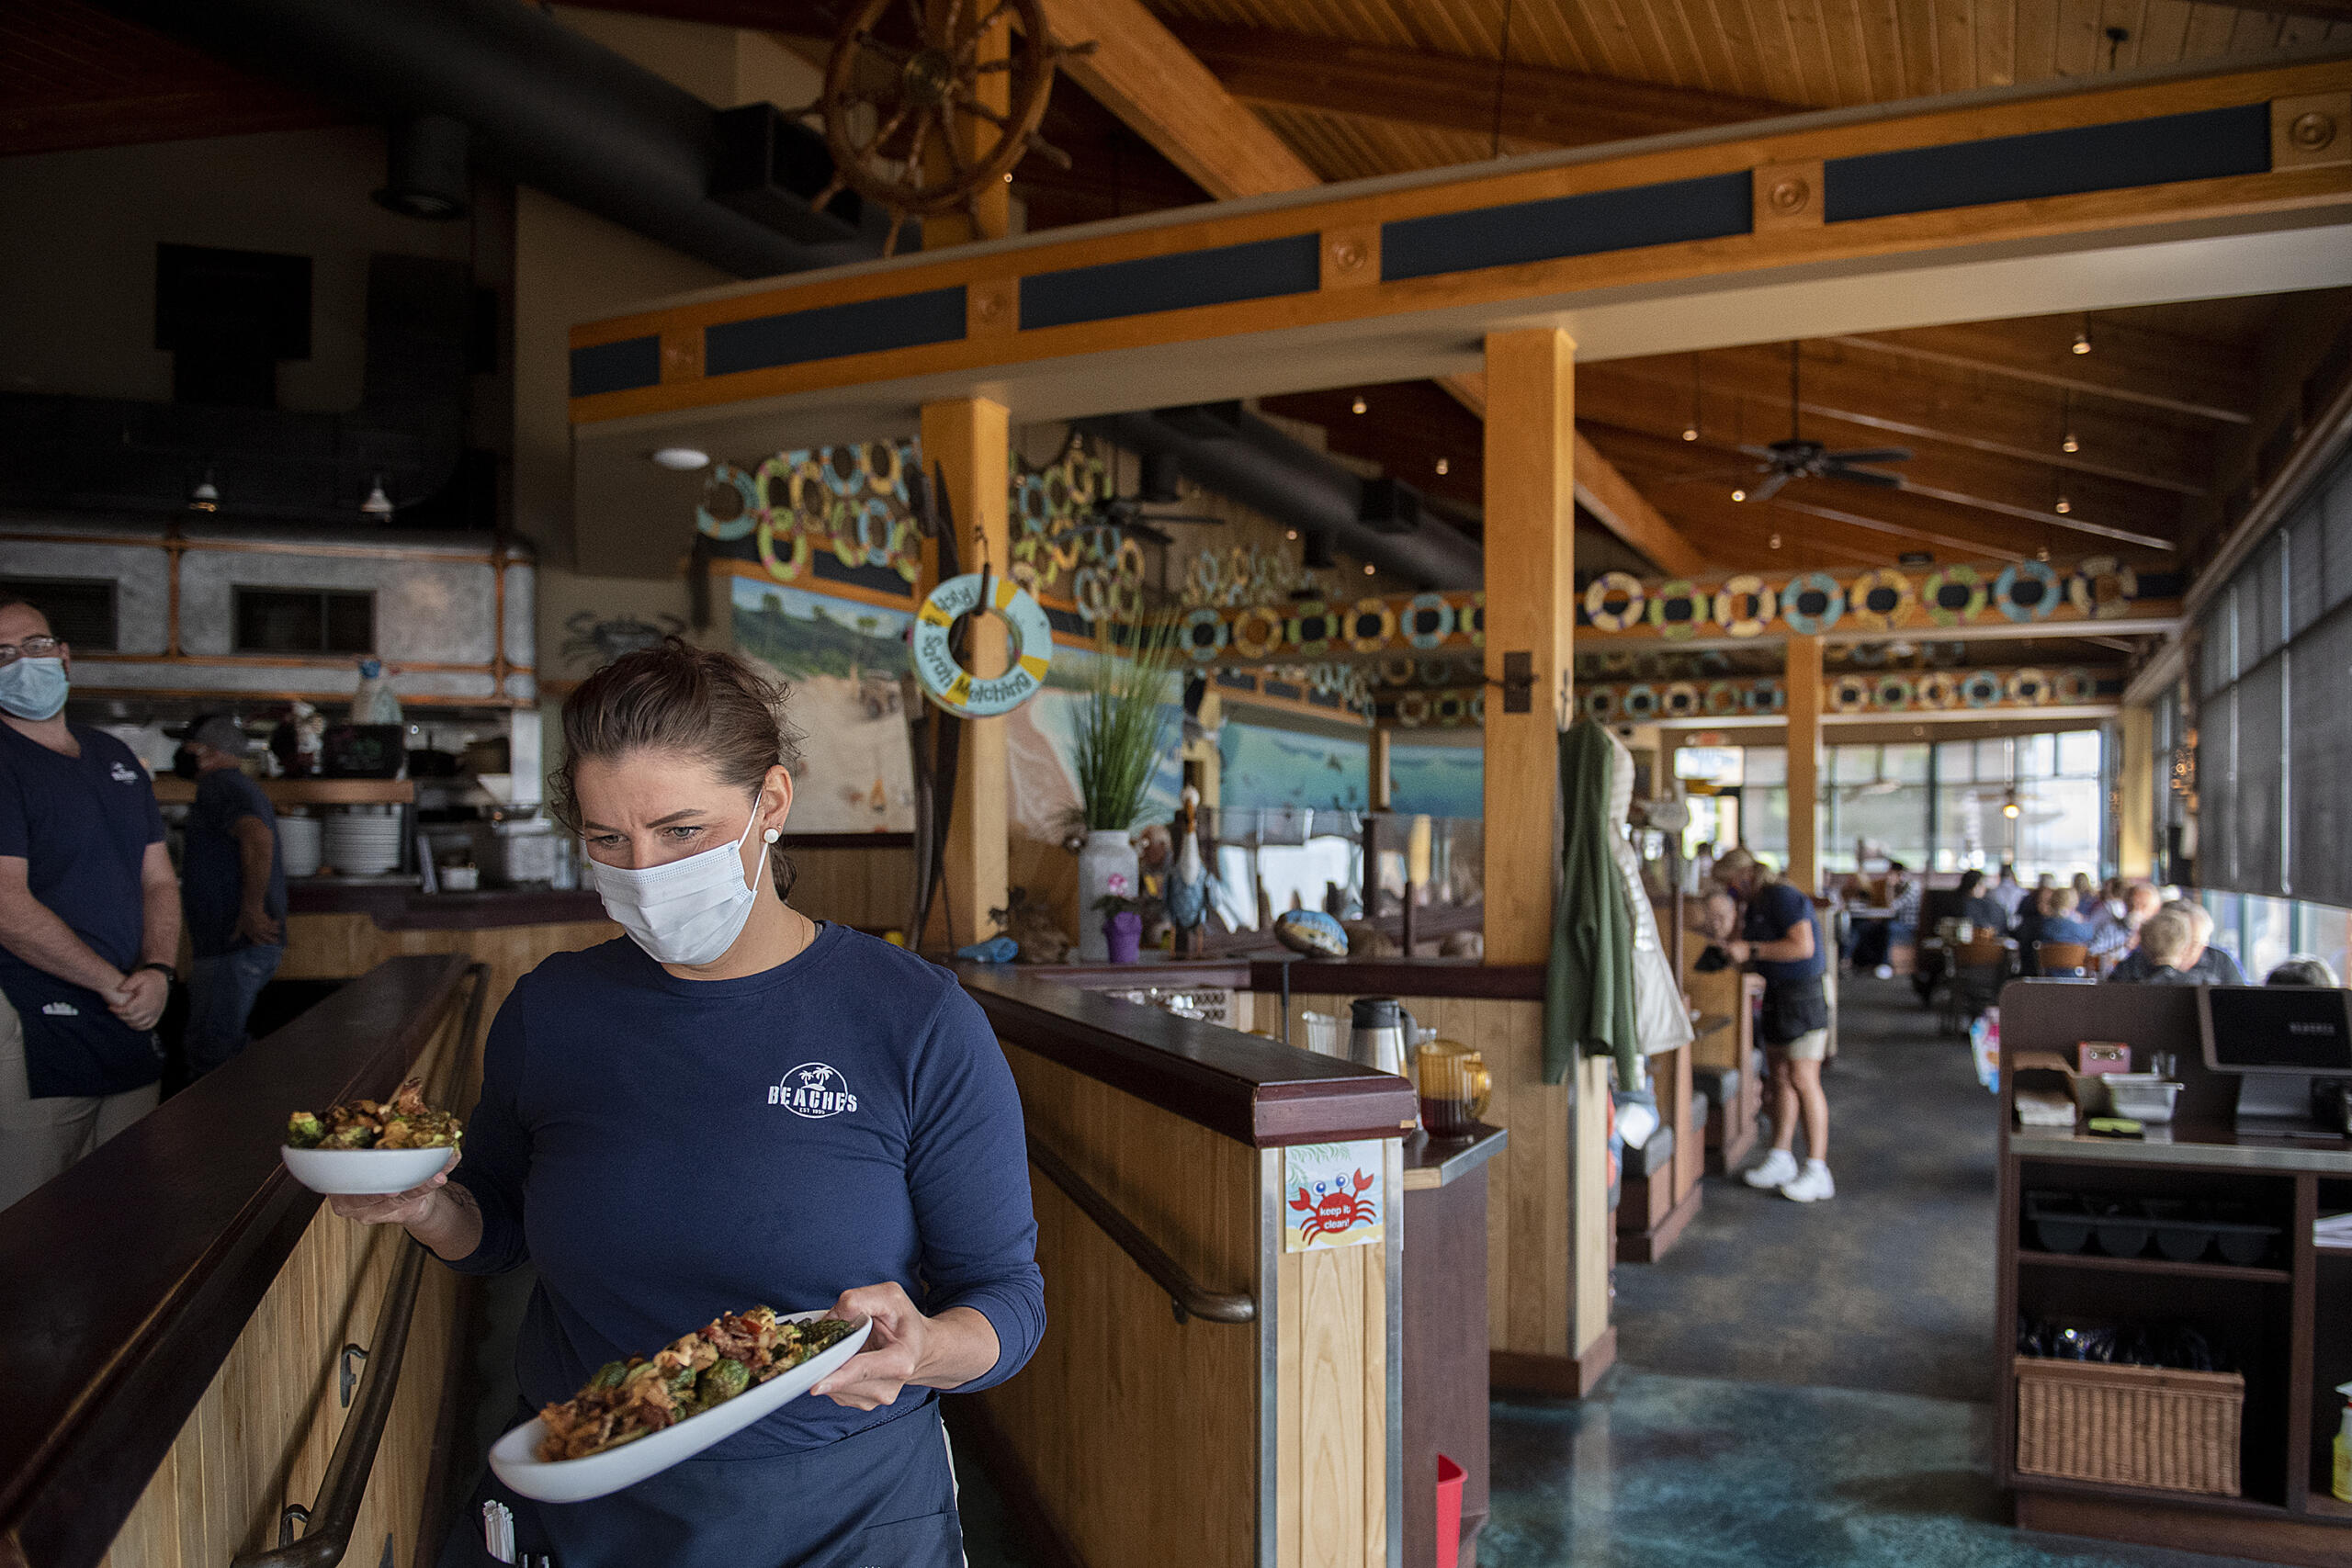 Chrissy Gibbins of Beaches restaurant brings out dishes to lunchtime customers on Thursday morning, May 6, 2021. Beaches, along with most restaurants in Vancouver, is having trouble filling open positions.